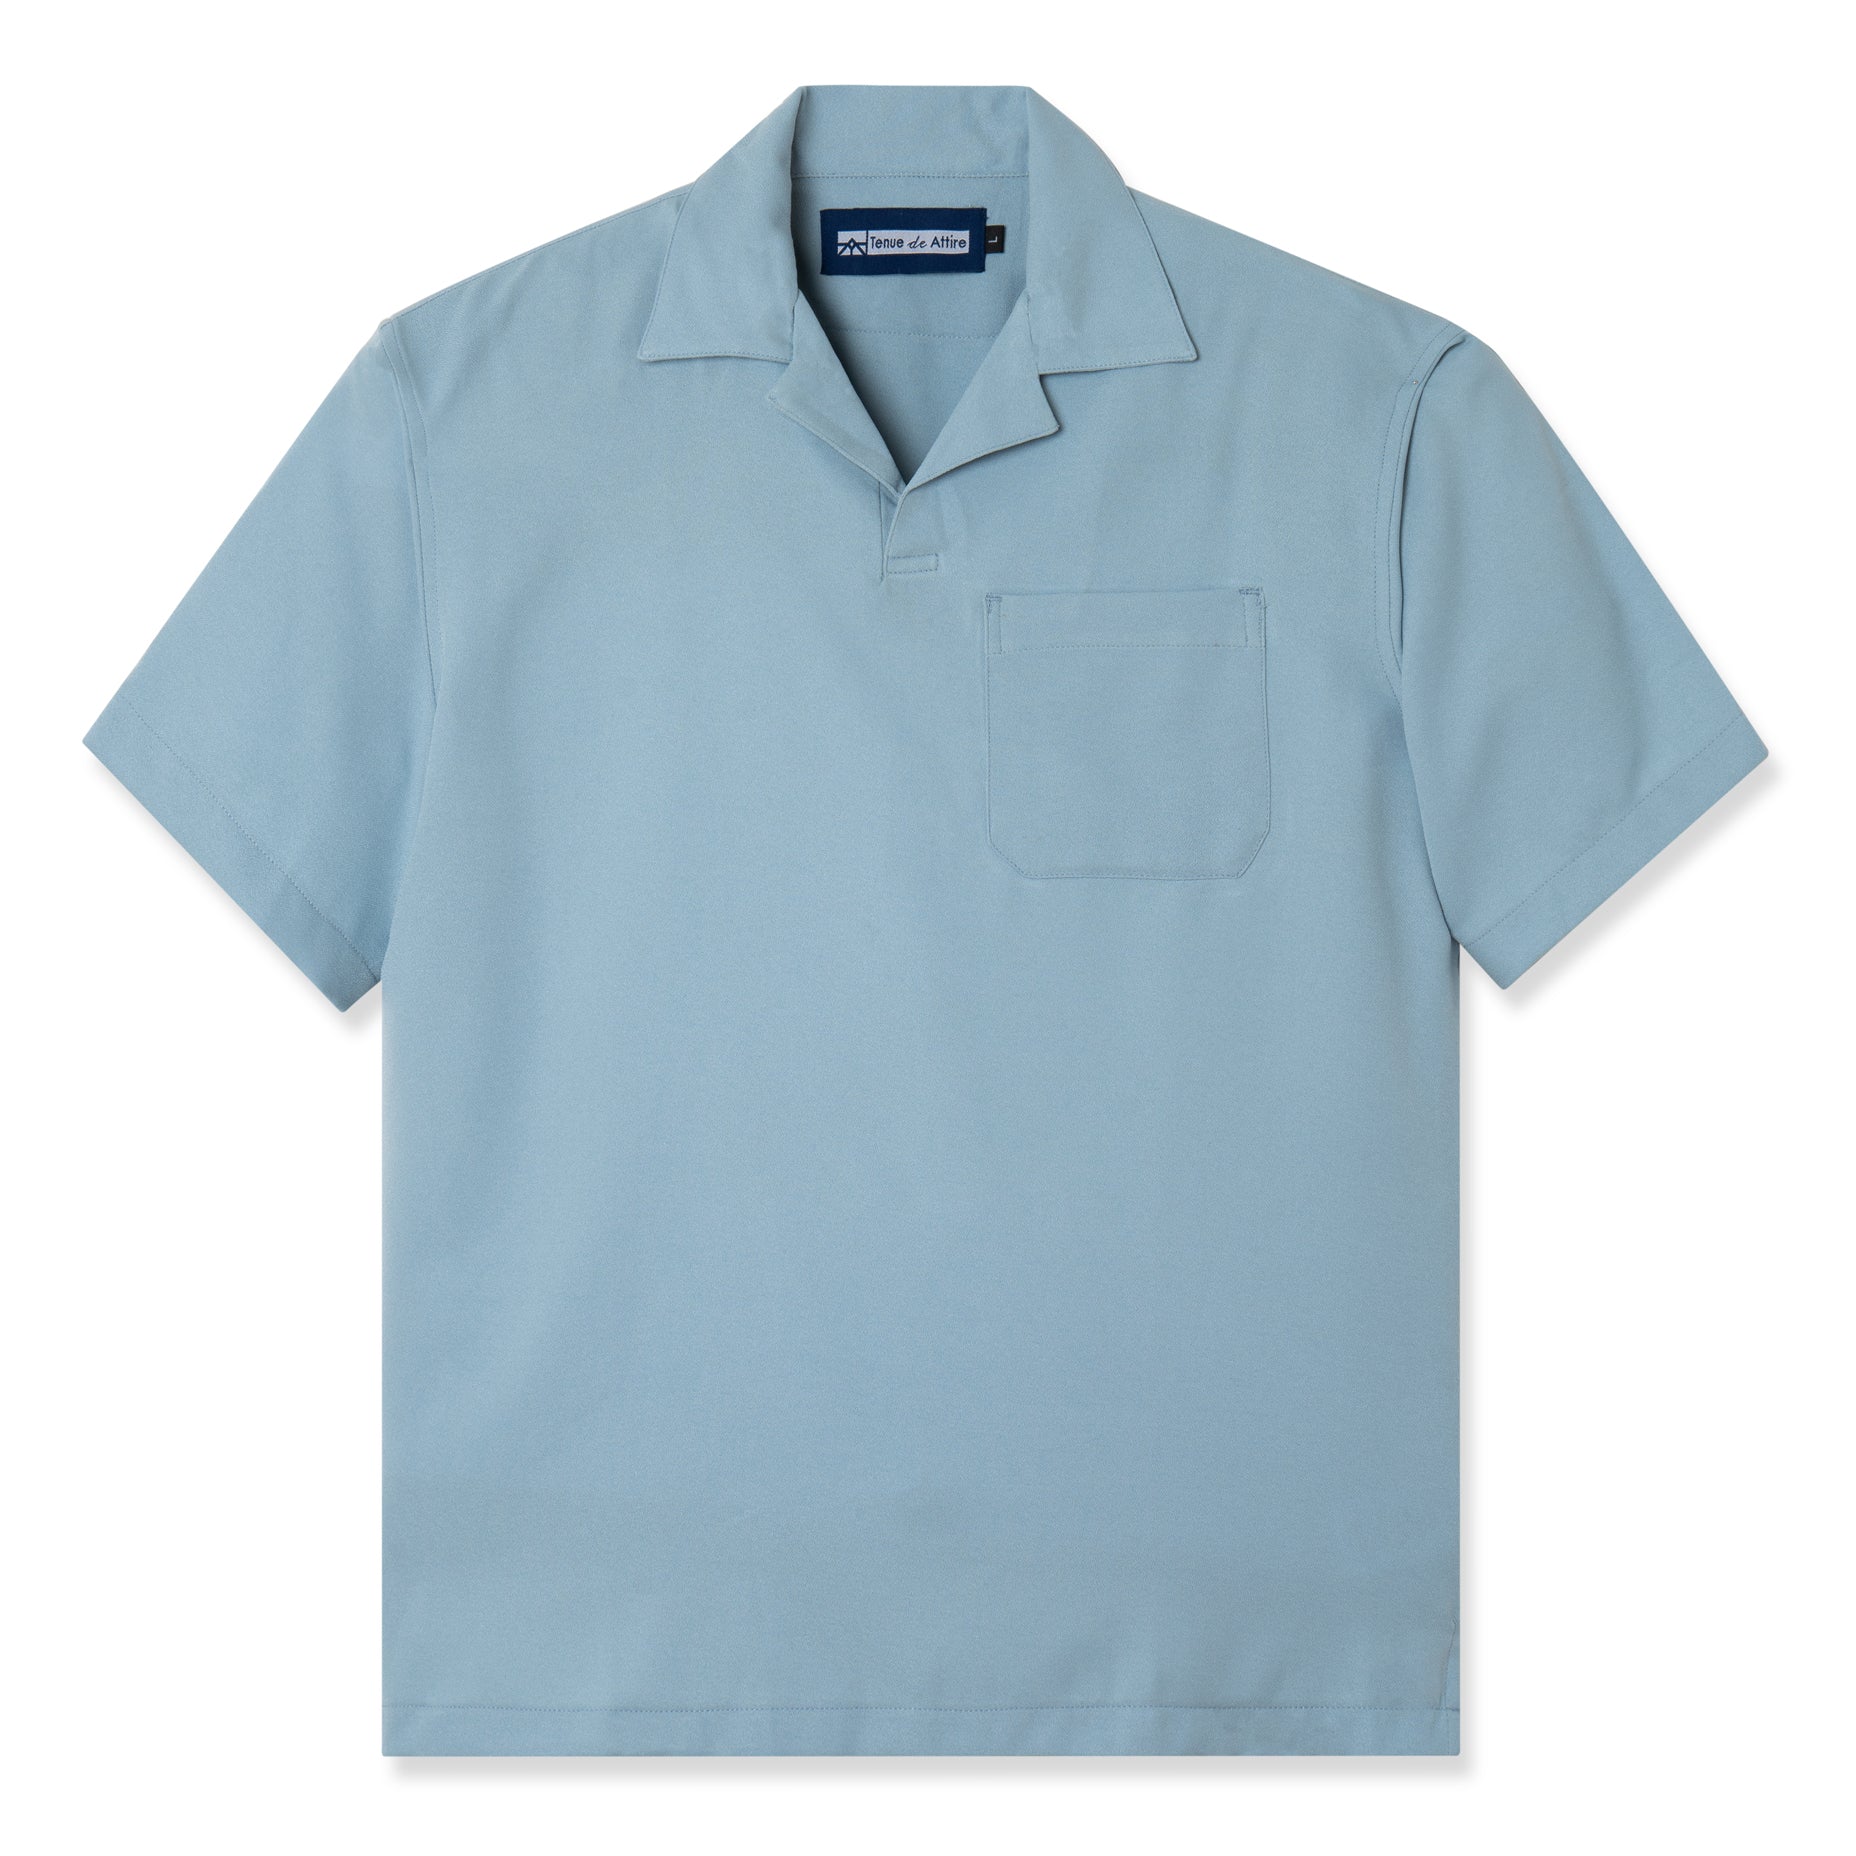 French Ivy Polo Short Sleeve - Mint Blue